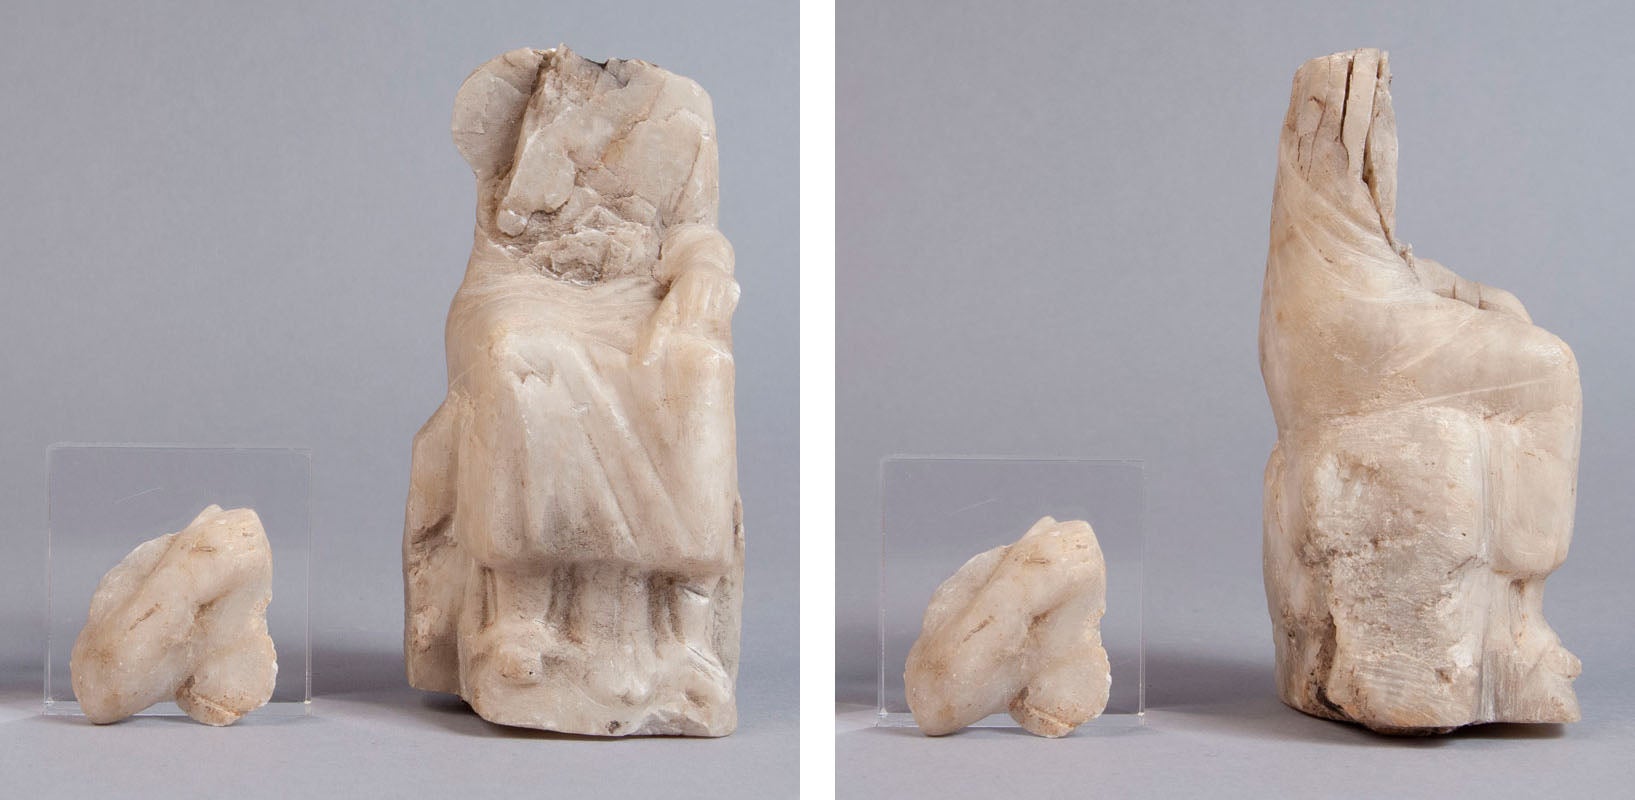 Seated figurine carved from alabaster